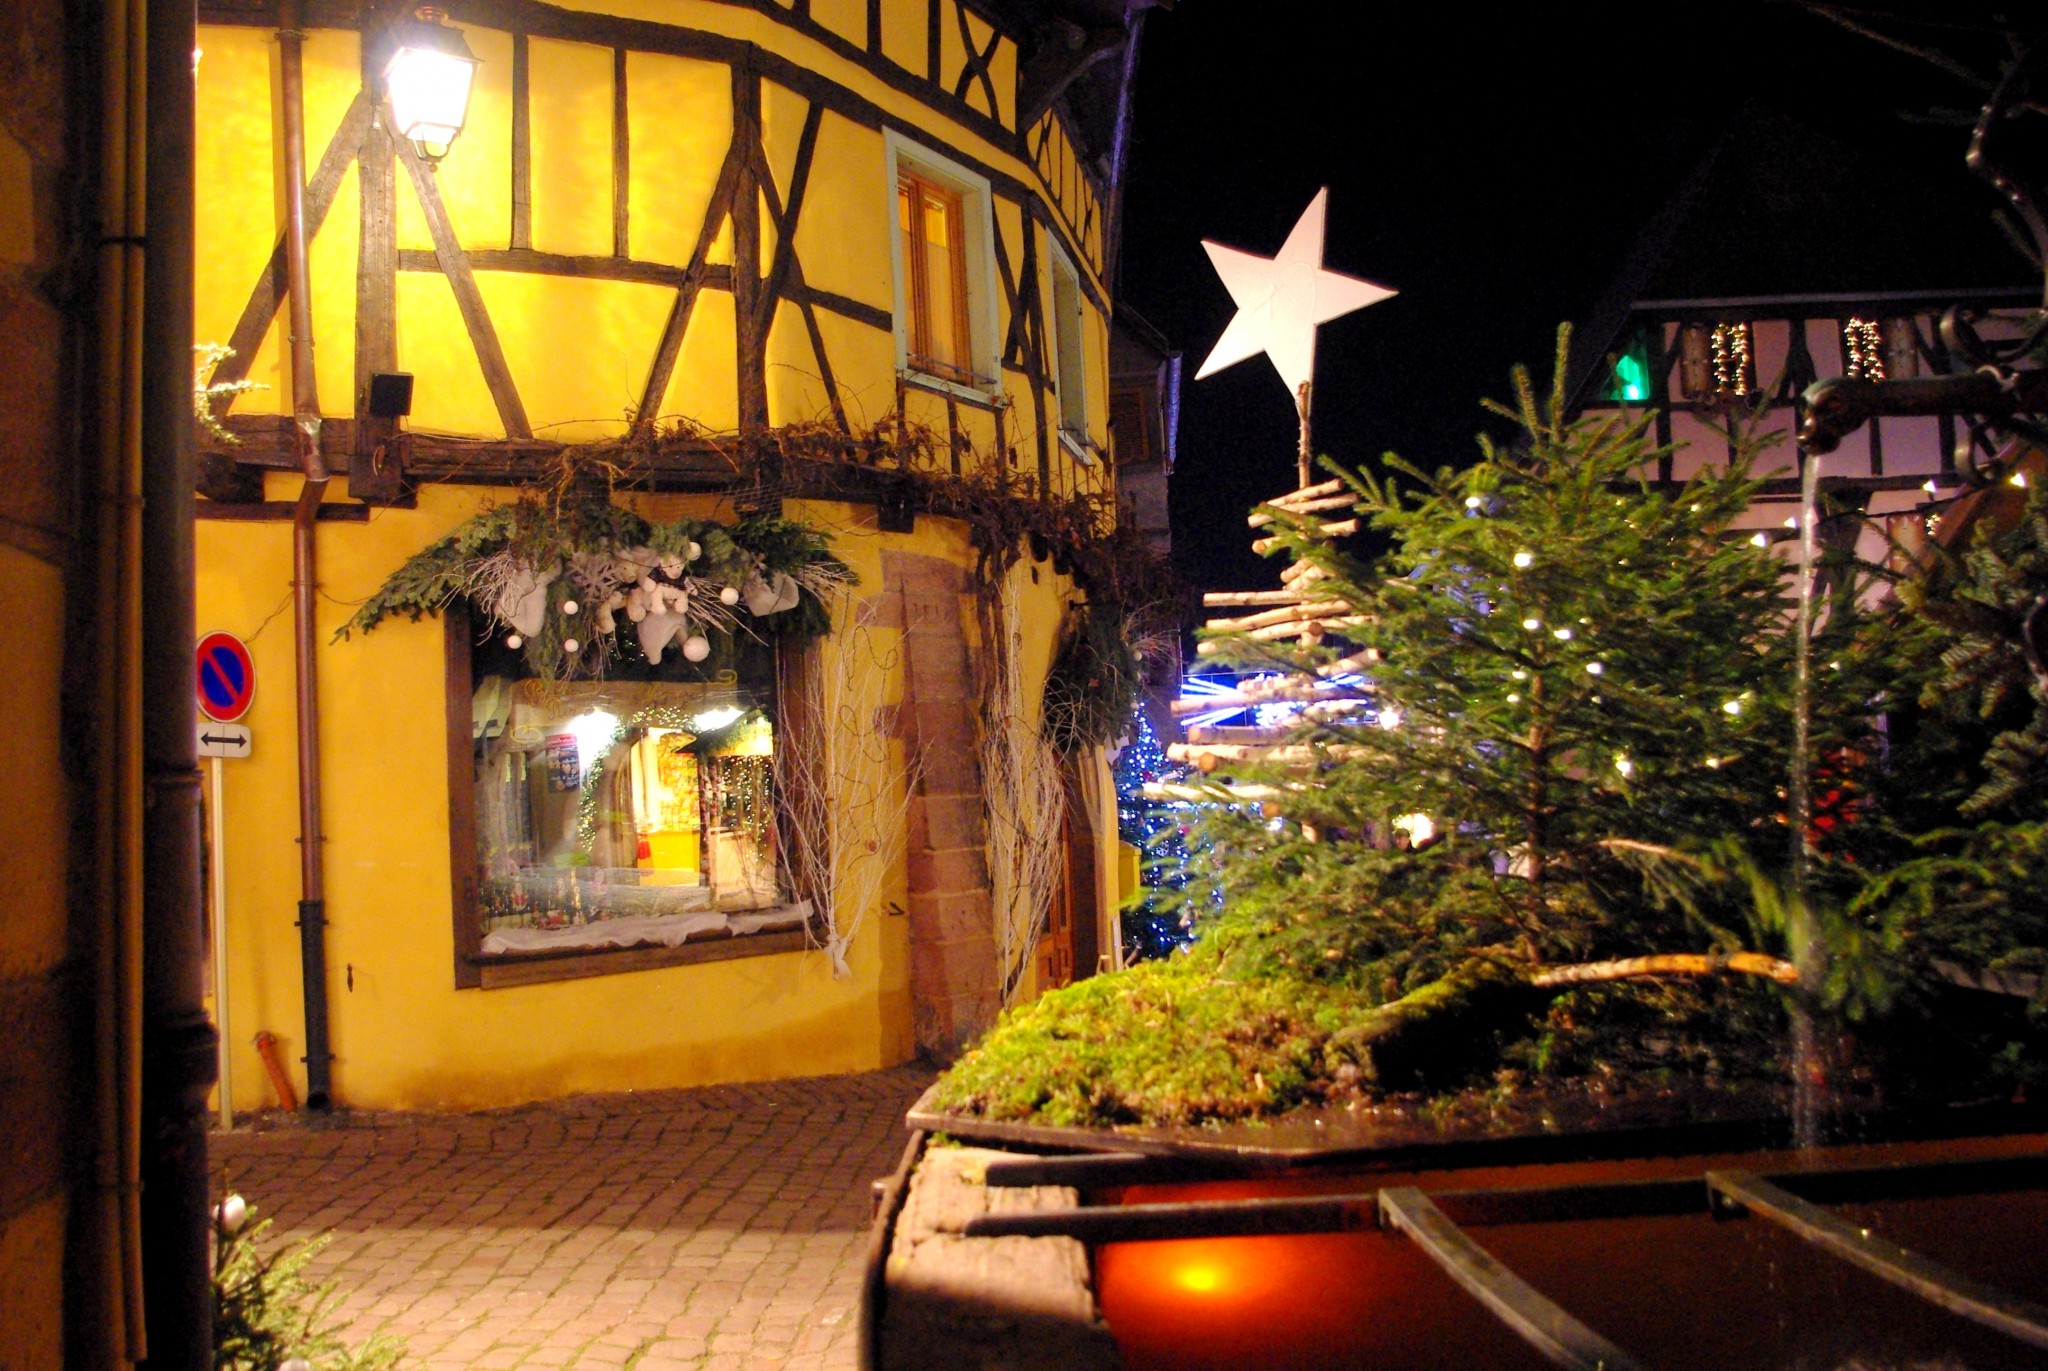 Christmas in Riquewihr, Alsace © French Moments